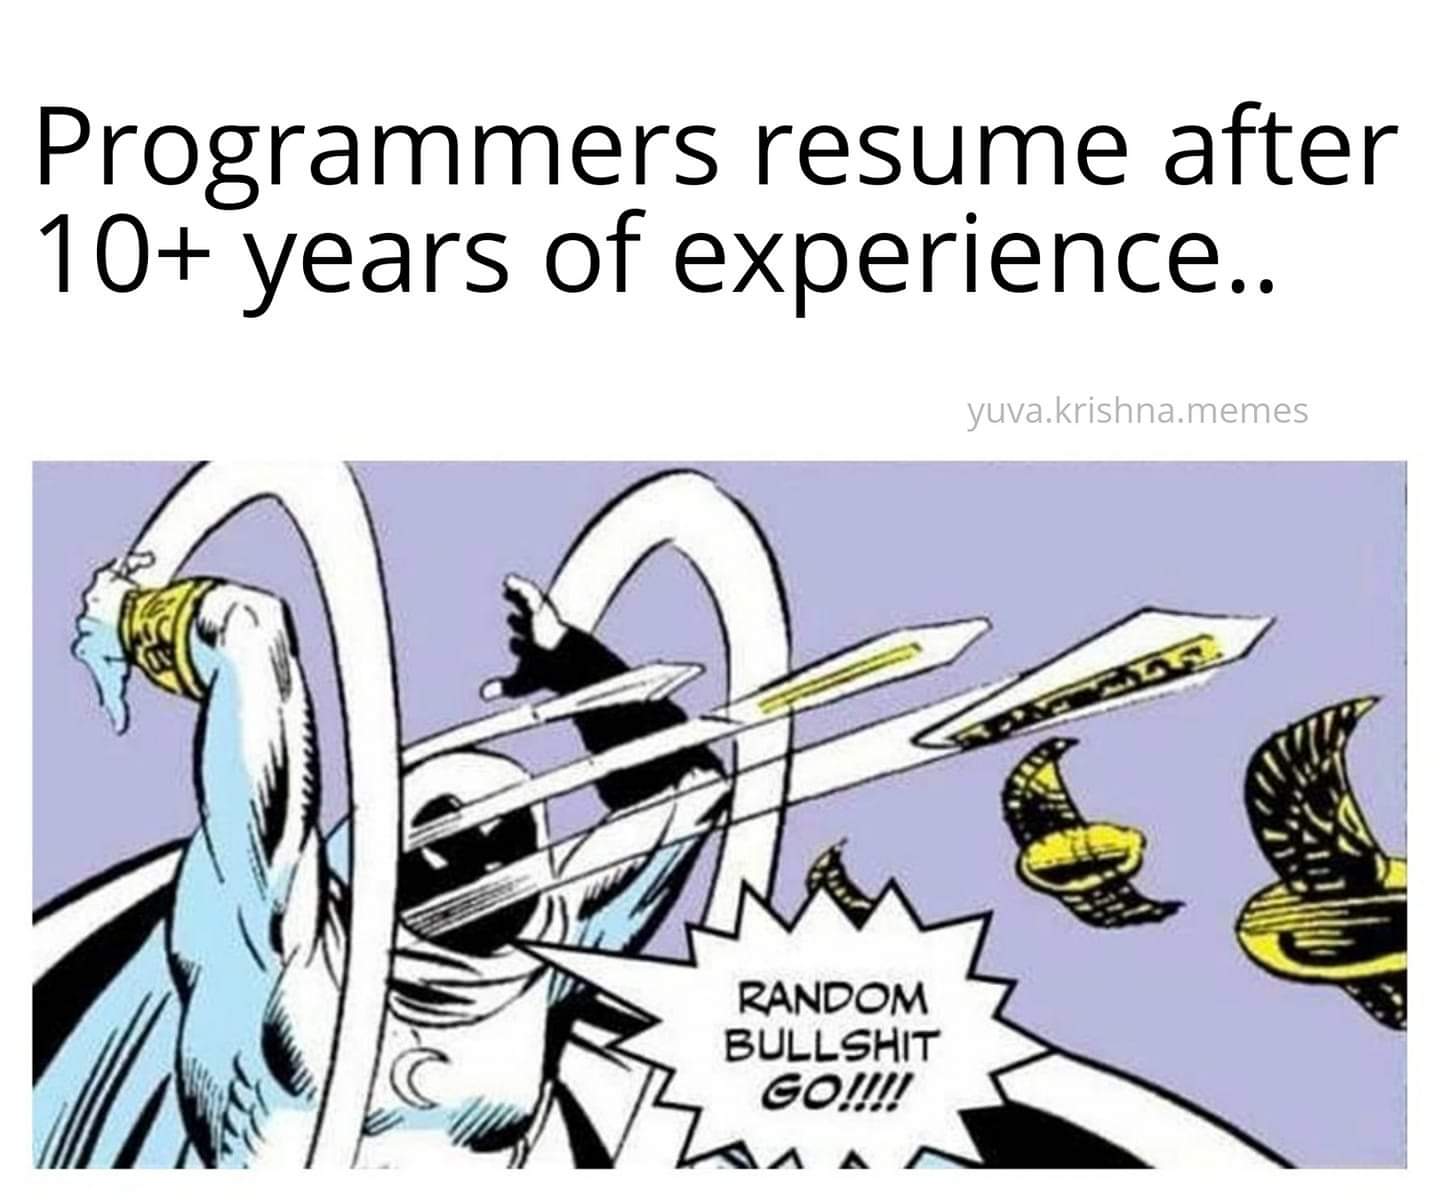 programmers_resume_after_10_years_experience.jpg